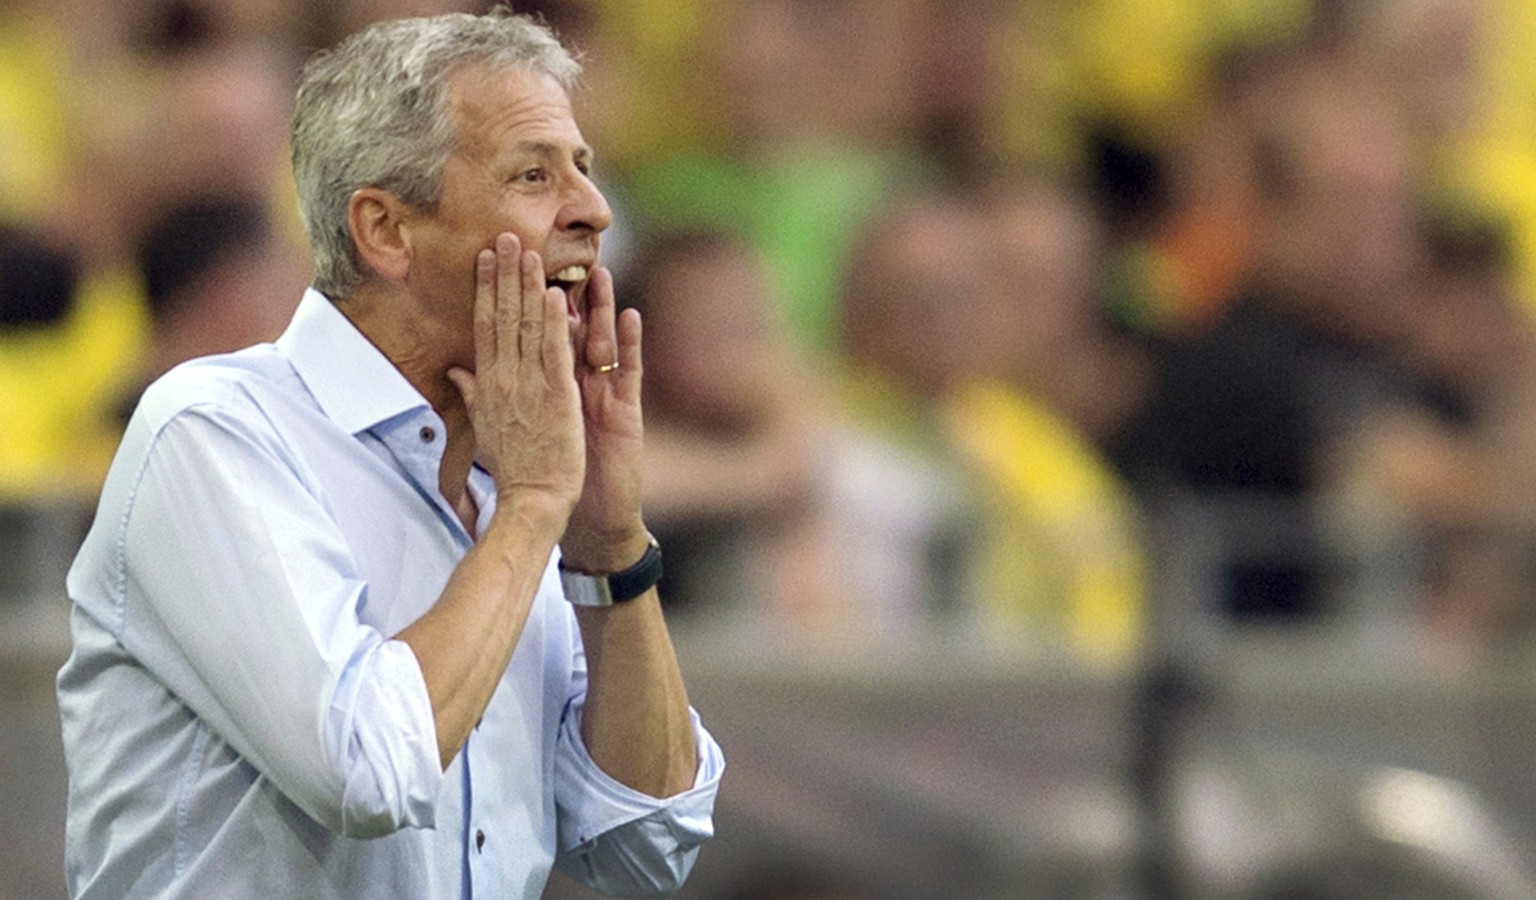 File -- In this August 8, 2015 photo Swiss soccer coach Lucien Favre shouts during a German Bundesliga soccer match between Borussia Dortmund and Borussia Monchengladbach in Dortmund, Germany. (Maja H ...